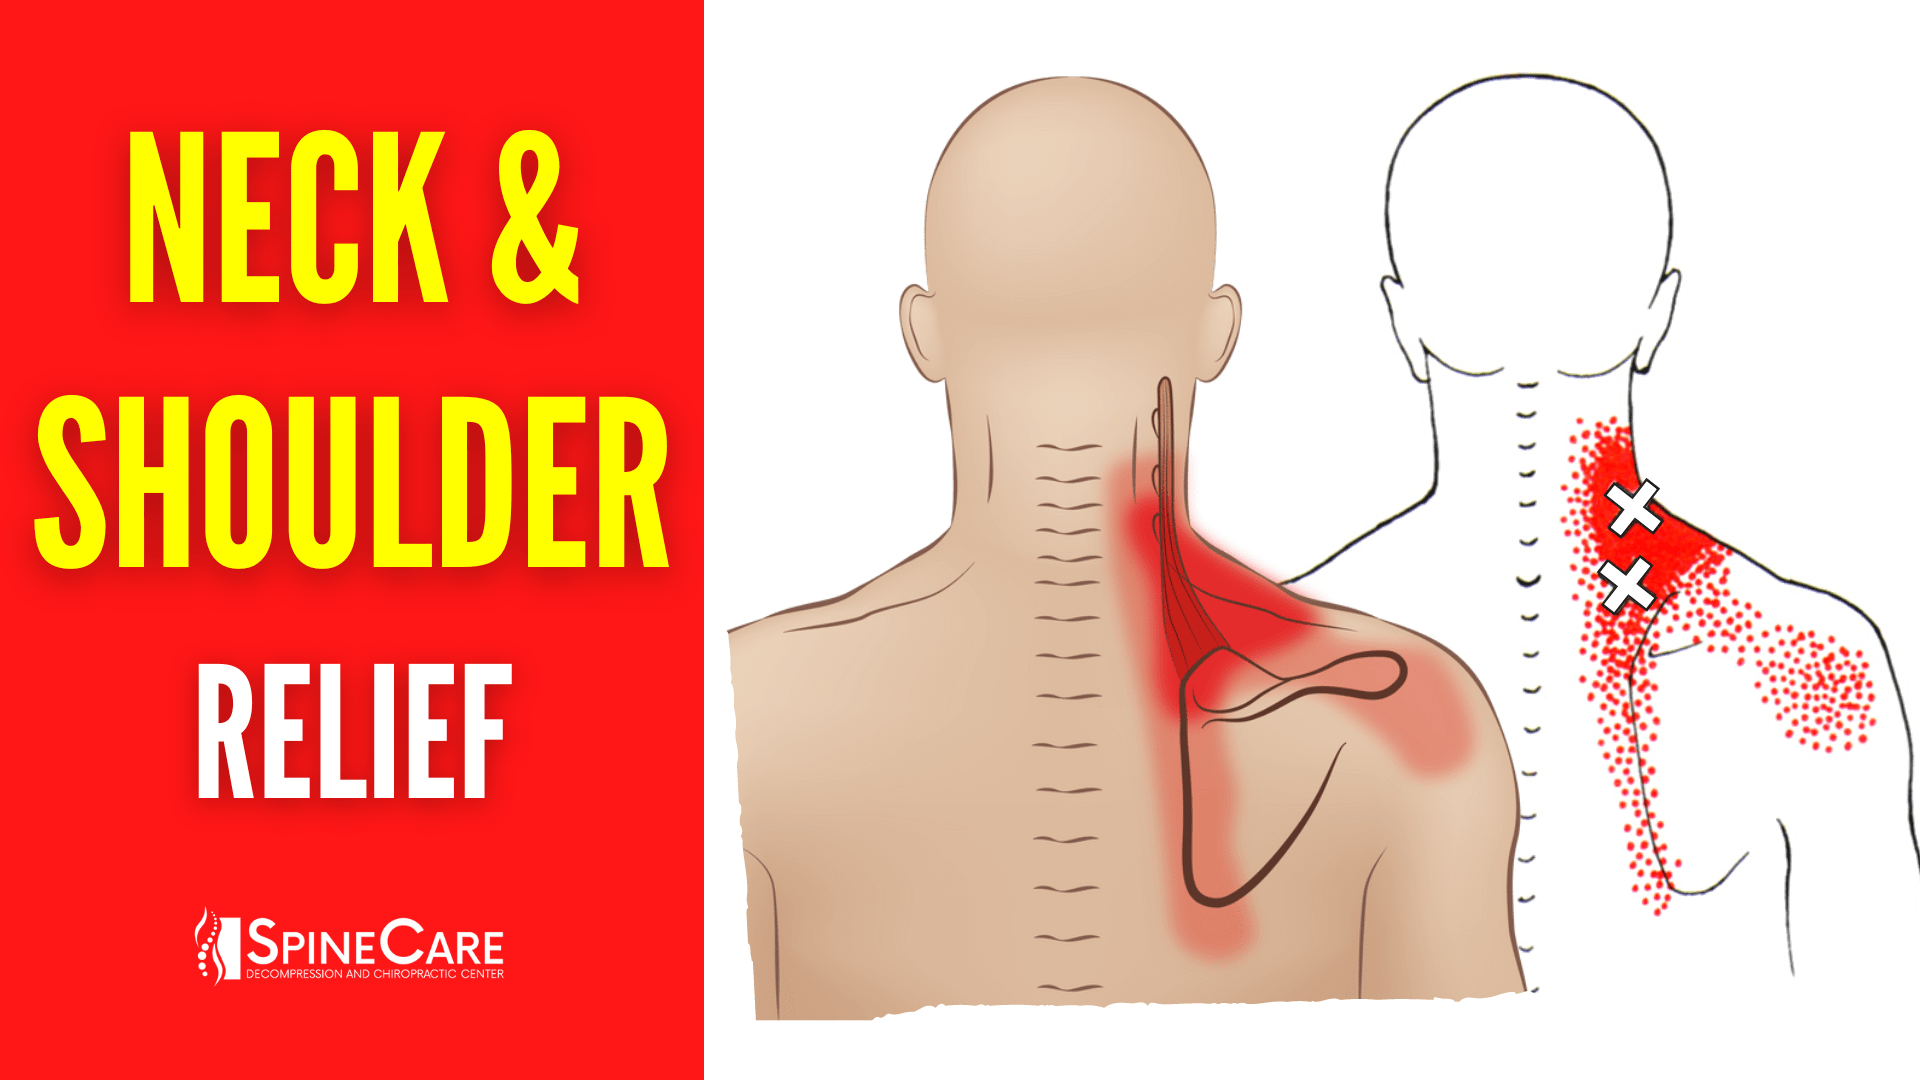 https://www.bestspinecare.com/wp-content/uploads/2022/08/How-to-Fix-Neck-and-Shoulder-Pain-FOR-GOOD.png